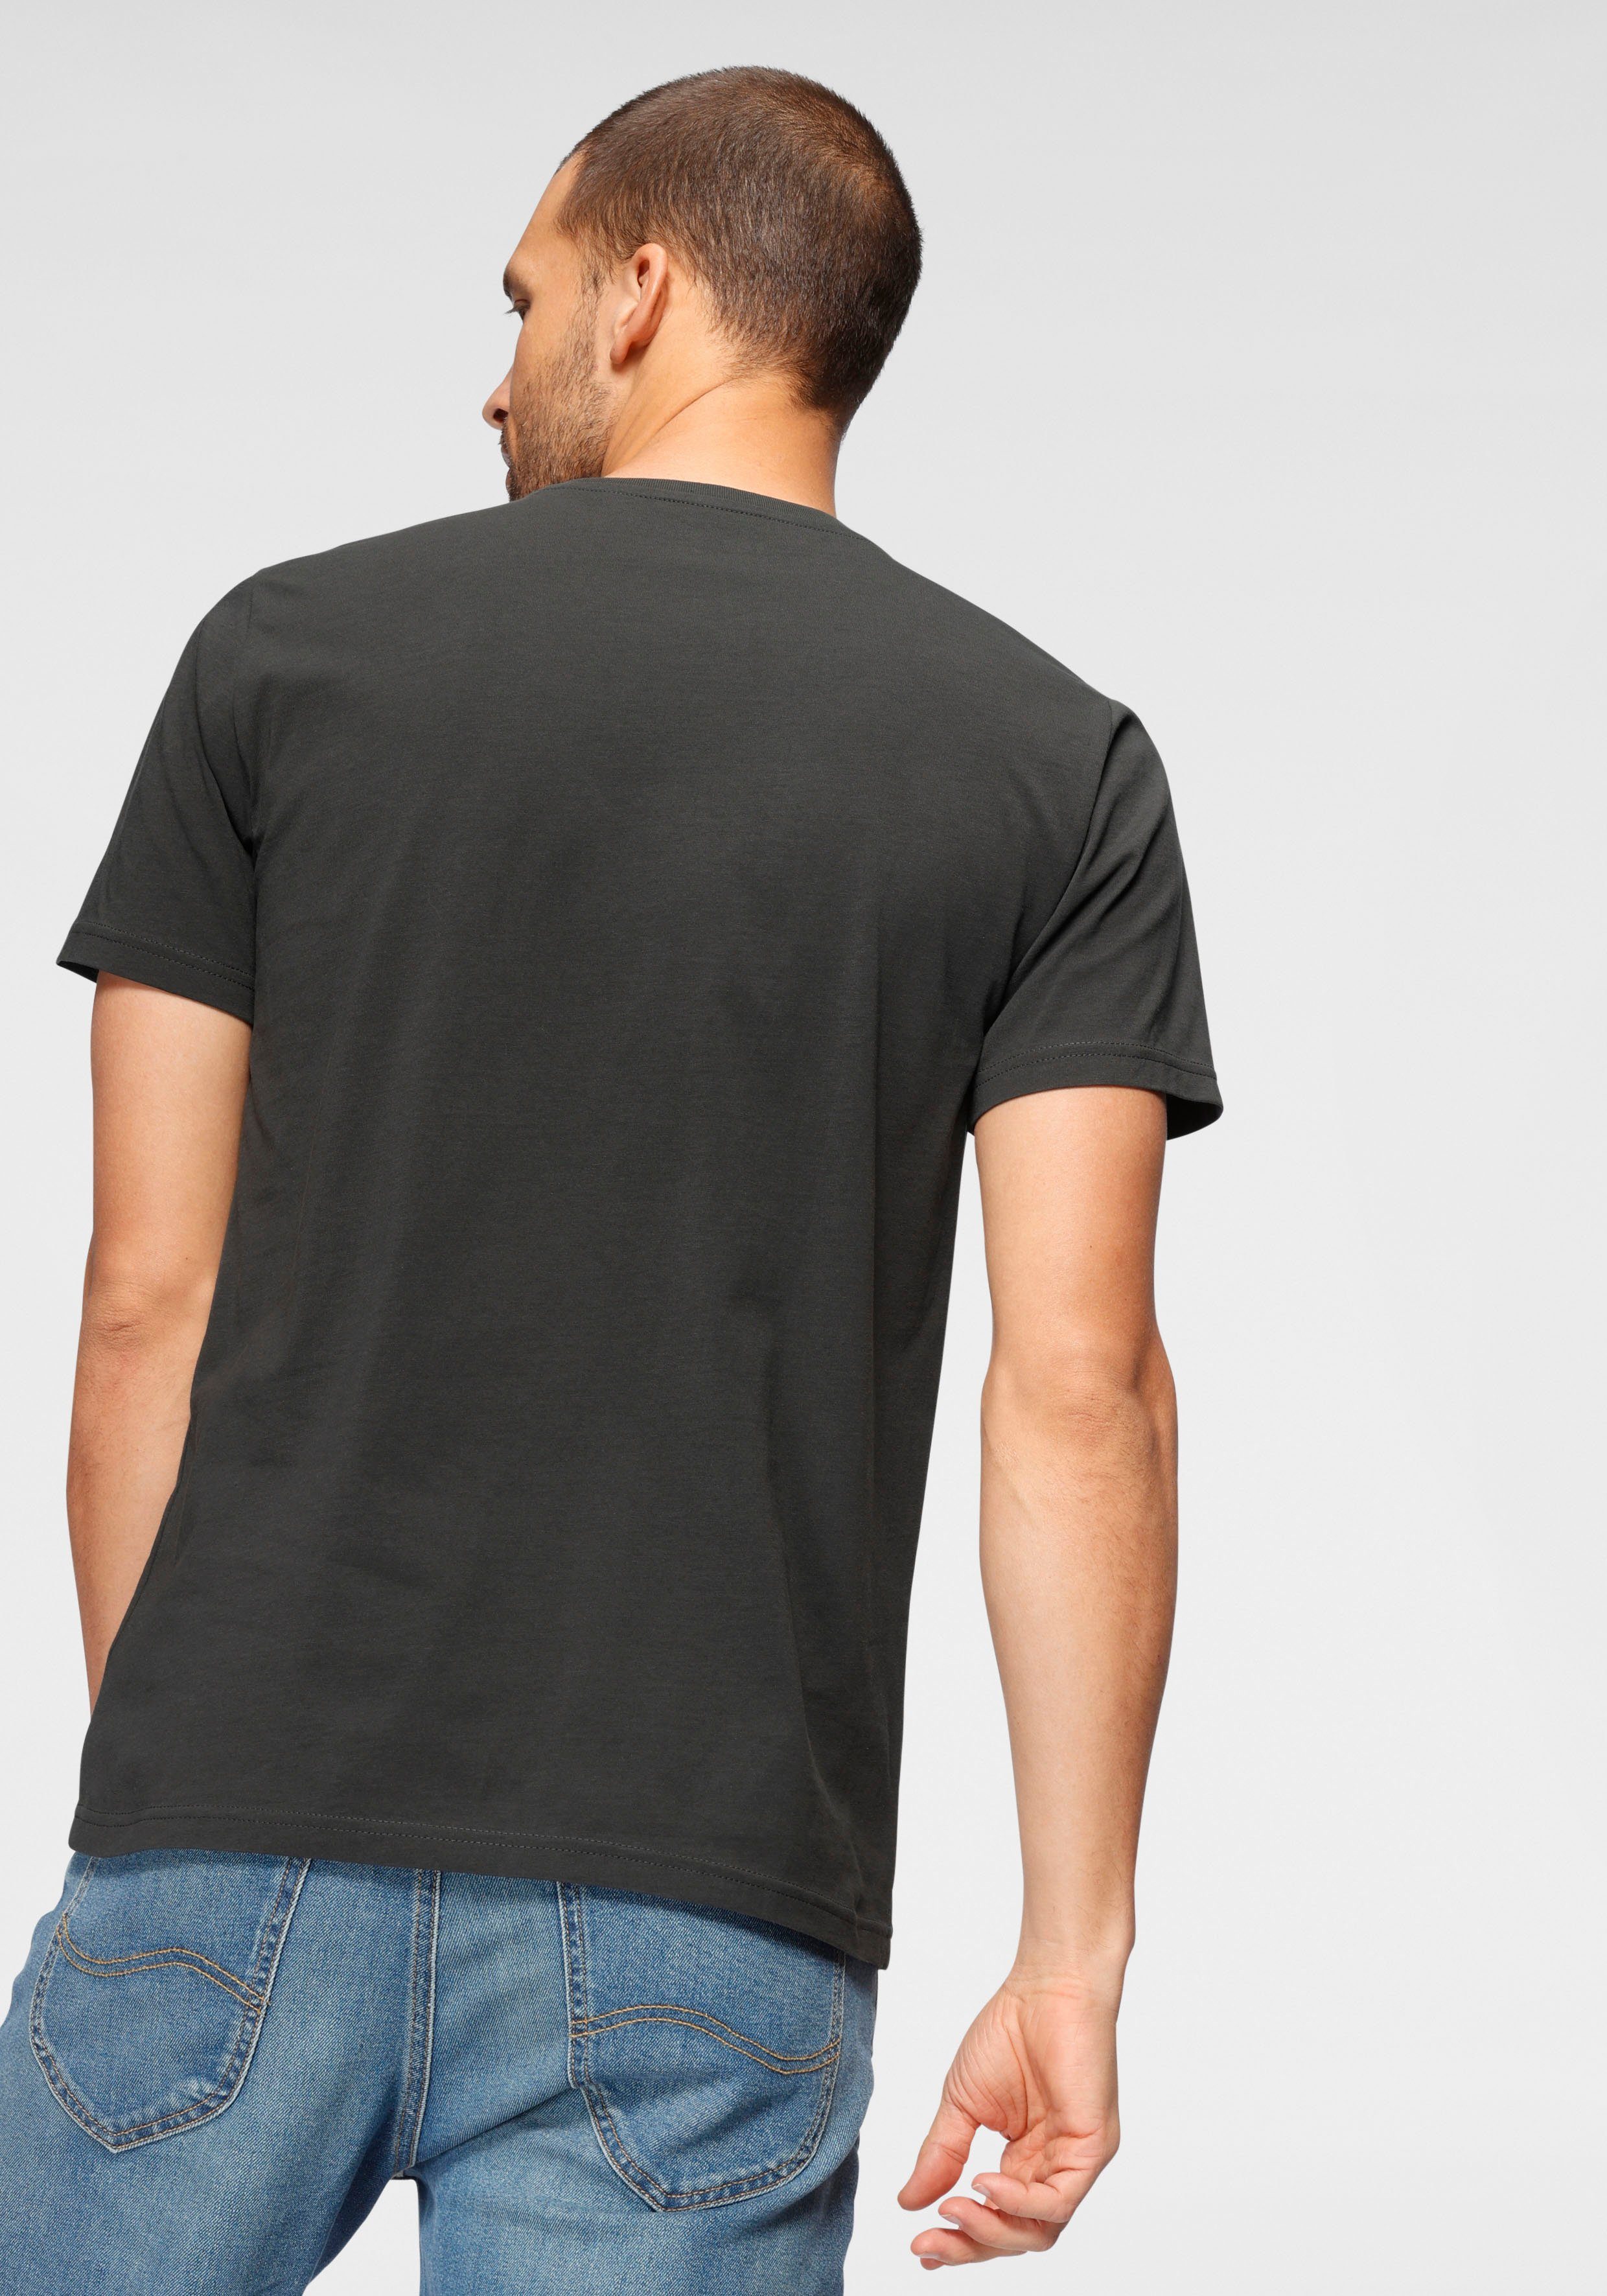 LOGO washed-black PATCH T-Shirt Lee® TEE